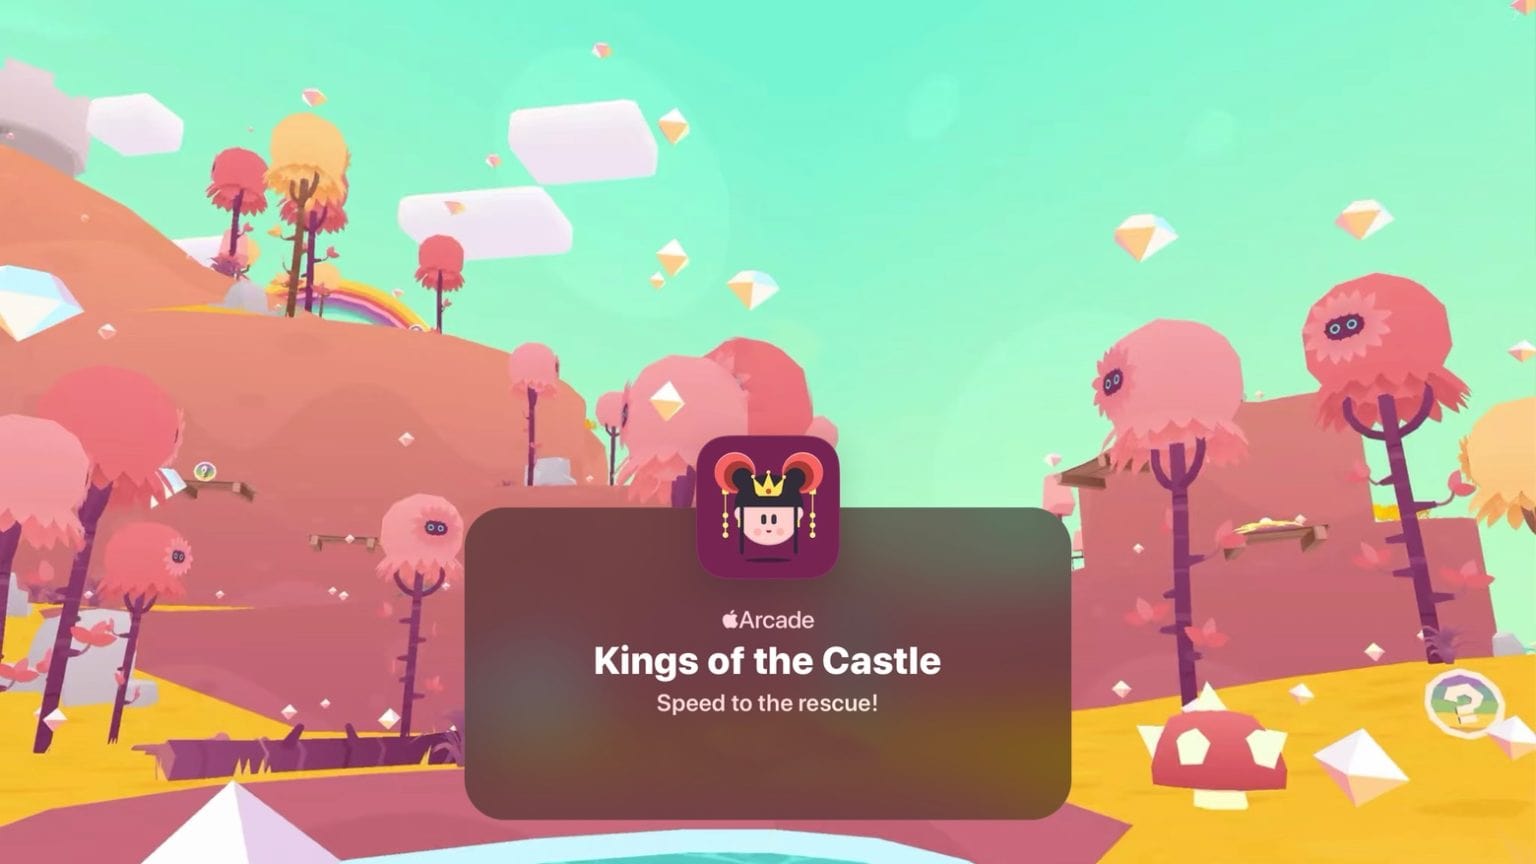 Kings of the Castle is the latest addition to Apple Arcade